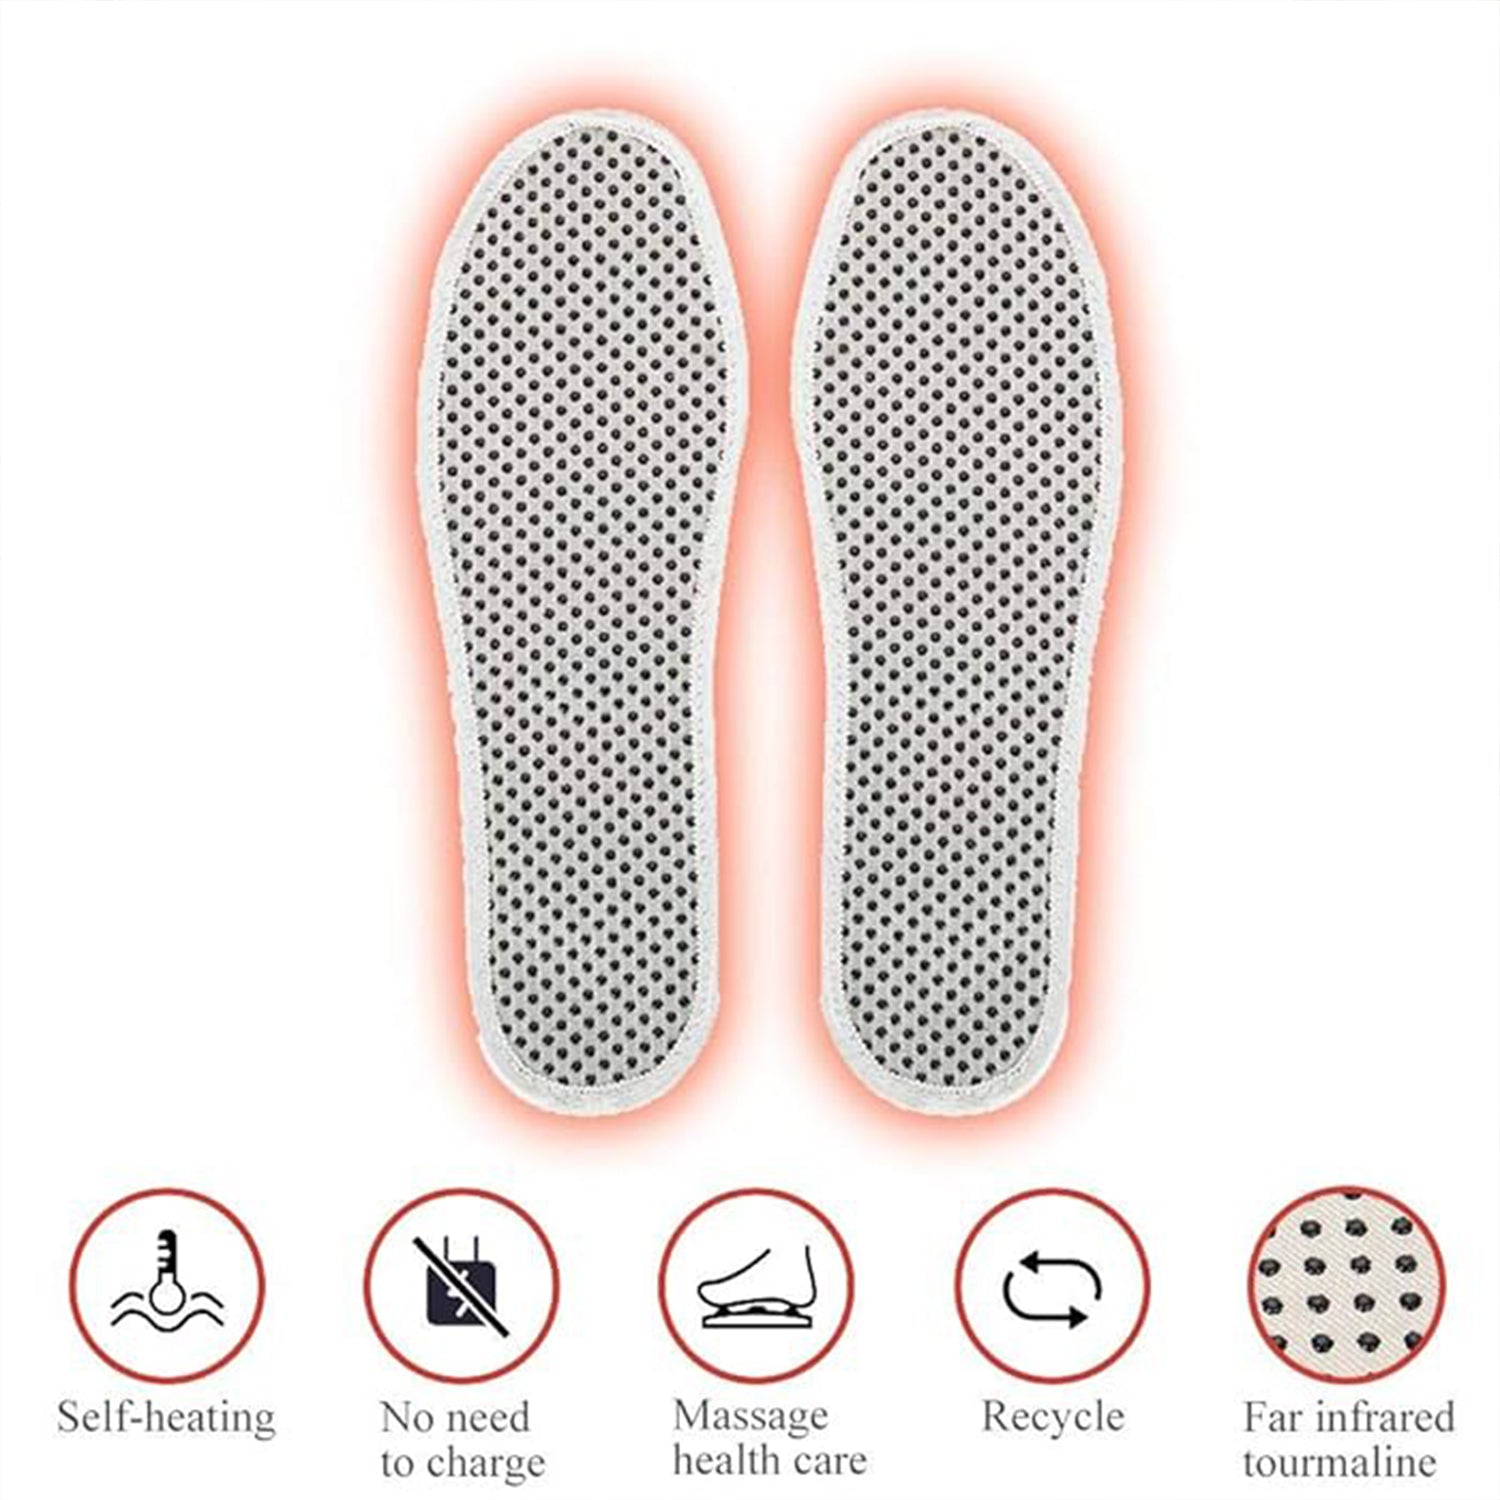 Massage Magnetic Self Heating Insole Shoe, Heating Insole for Women Men - Unisex Warm Insole - Thermal Insoles - Tourmaline Self Heating Shoe Inserts - Warm Shoe Pad (1 Pair)